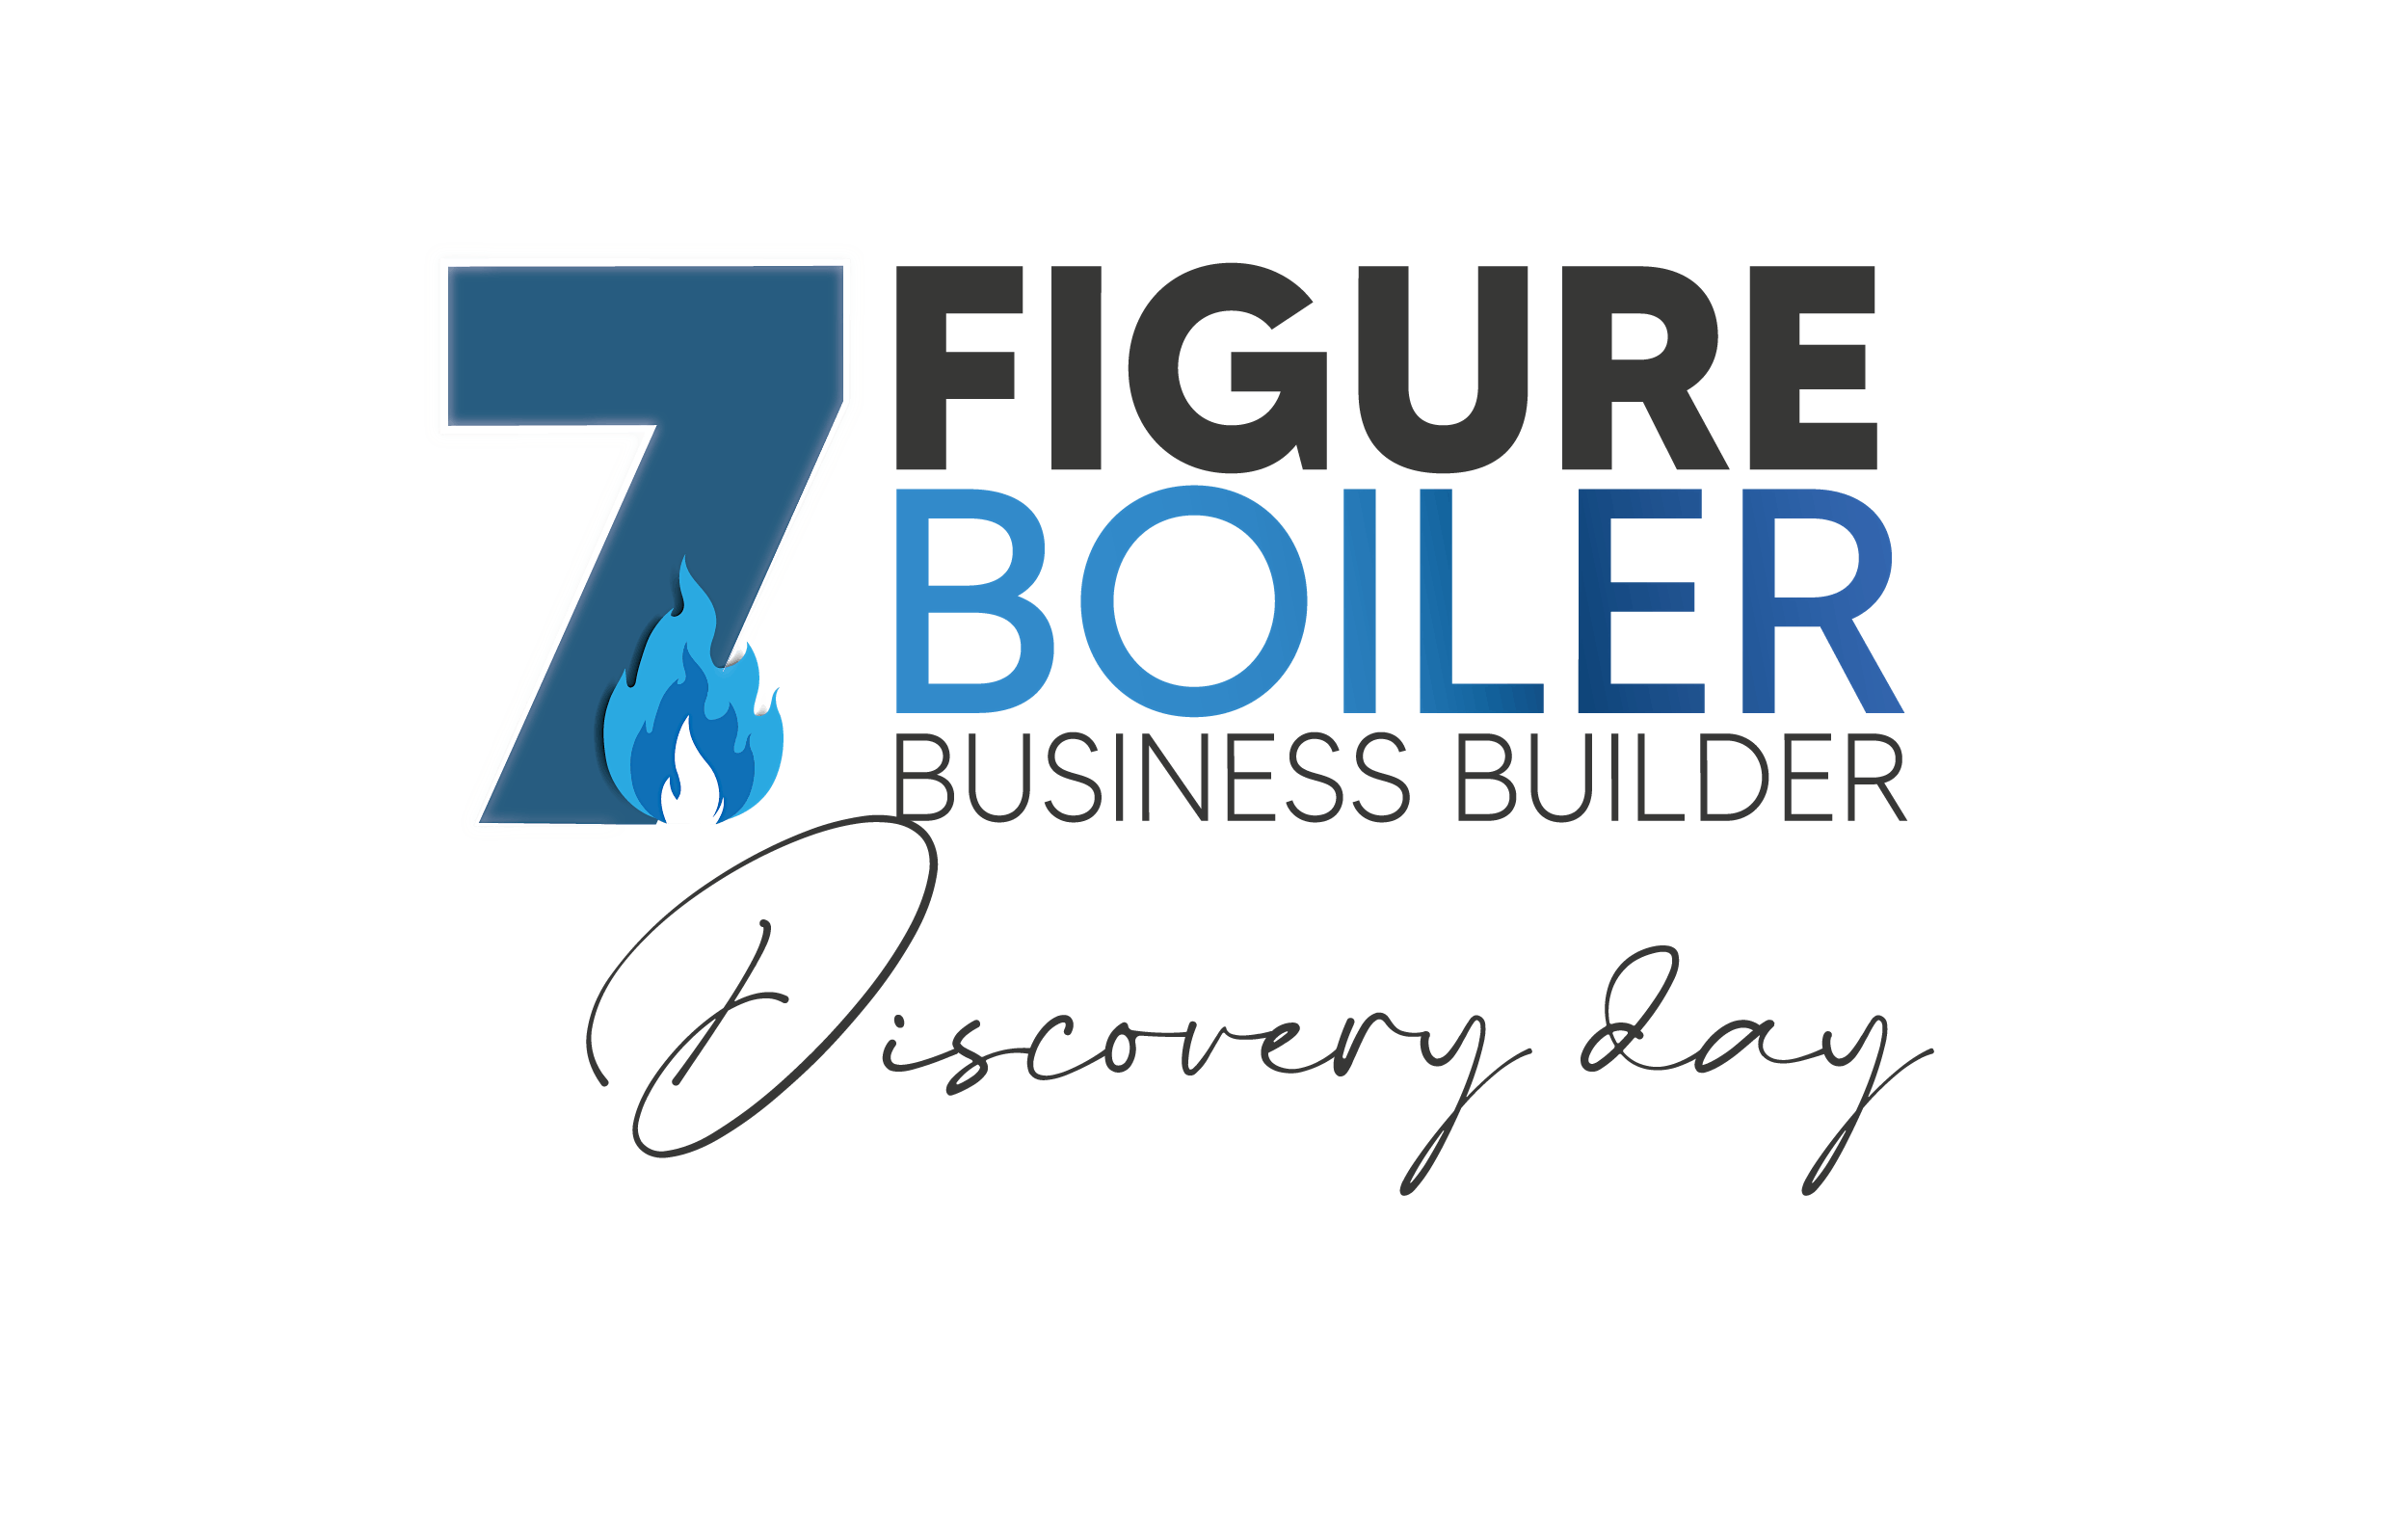 7 Figure Boiler Business Business Builder discovery day